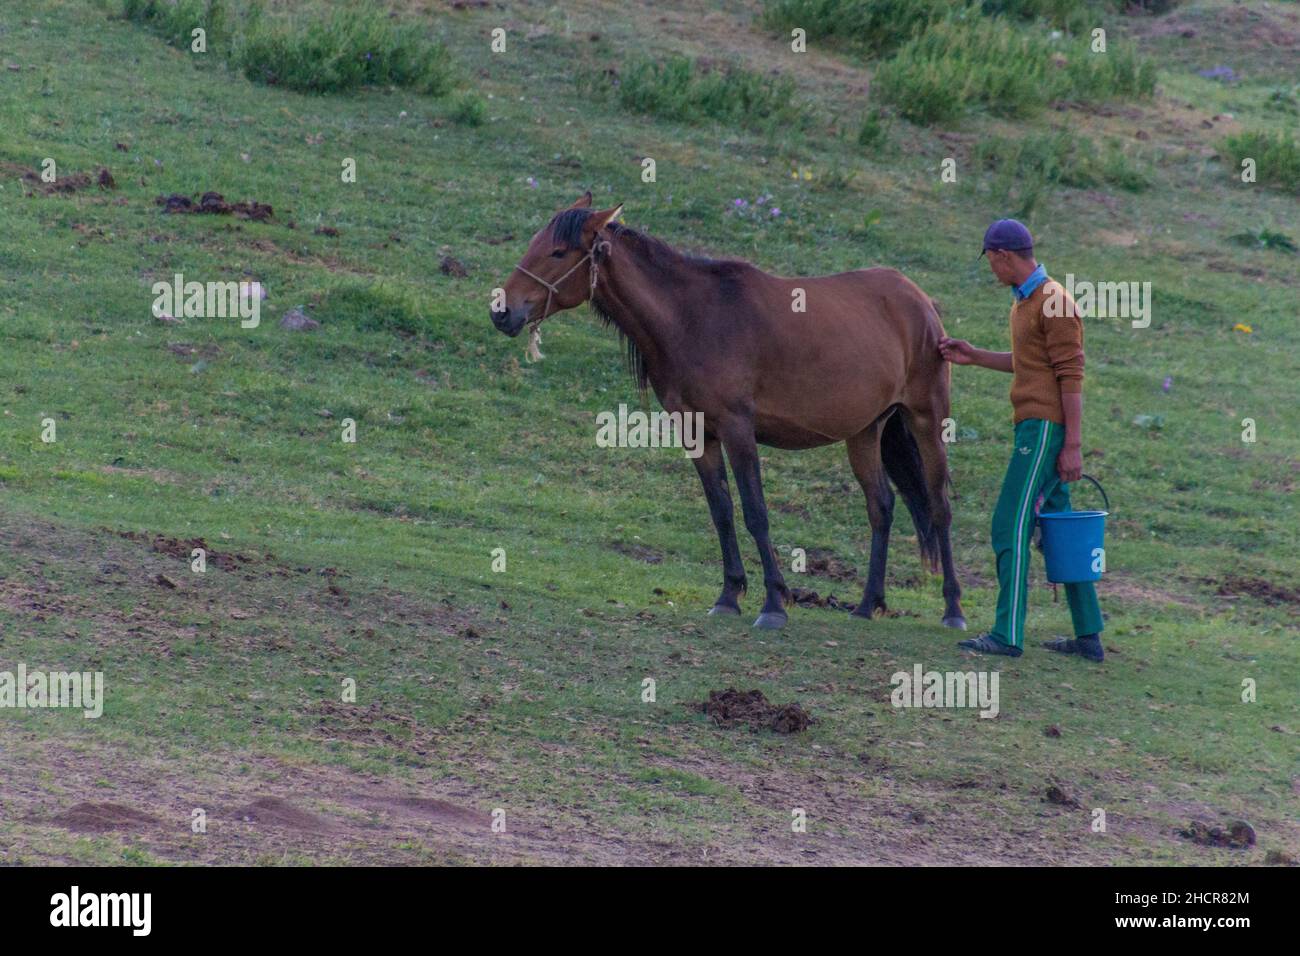 SONG KUL, KYRGYZSTAN - JULY 22, 2018: Mare milking in the mountains near Song Kul lake, Kyrgyzstan Stock Photo